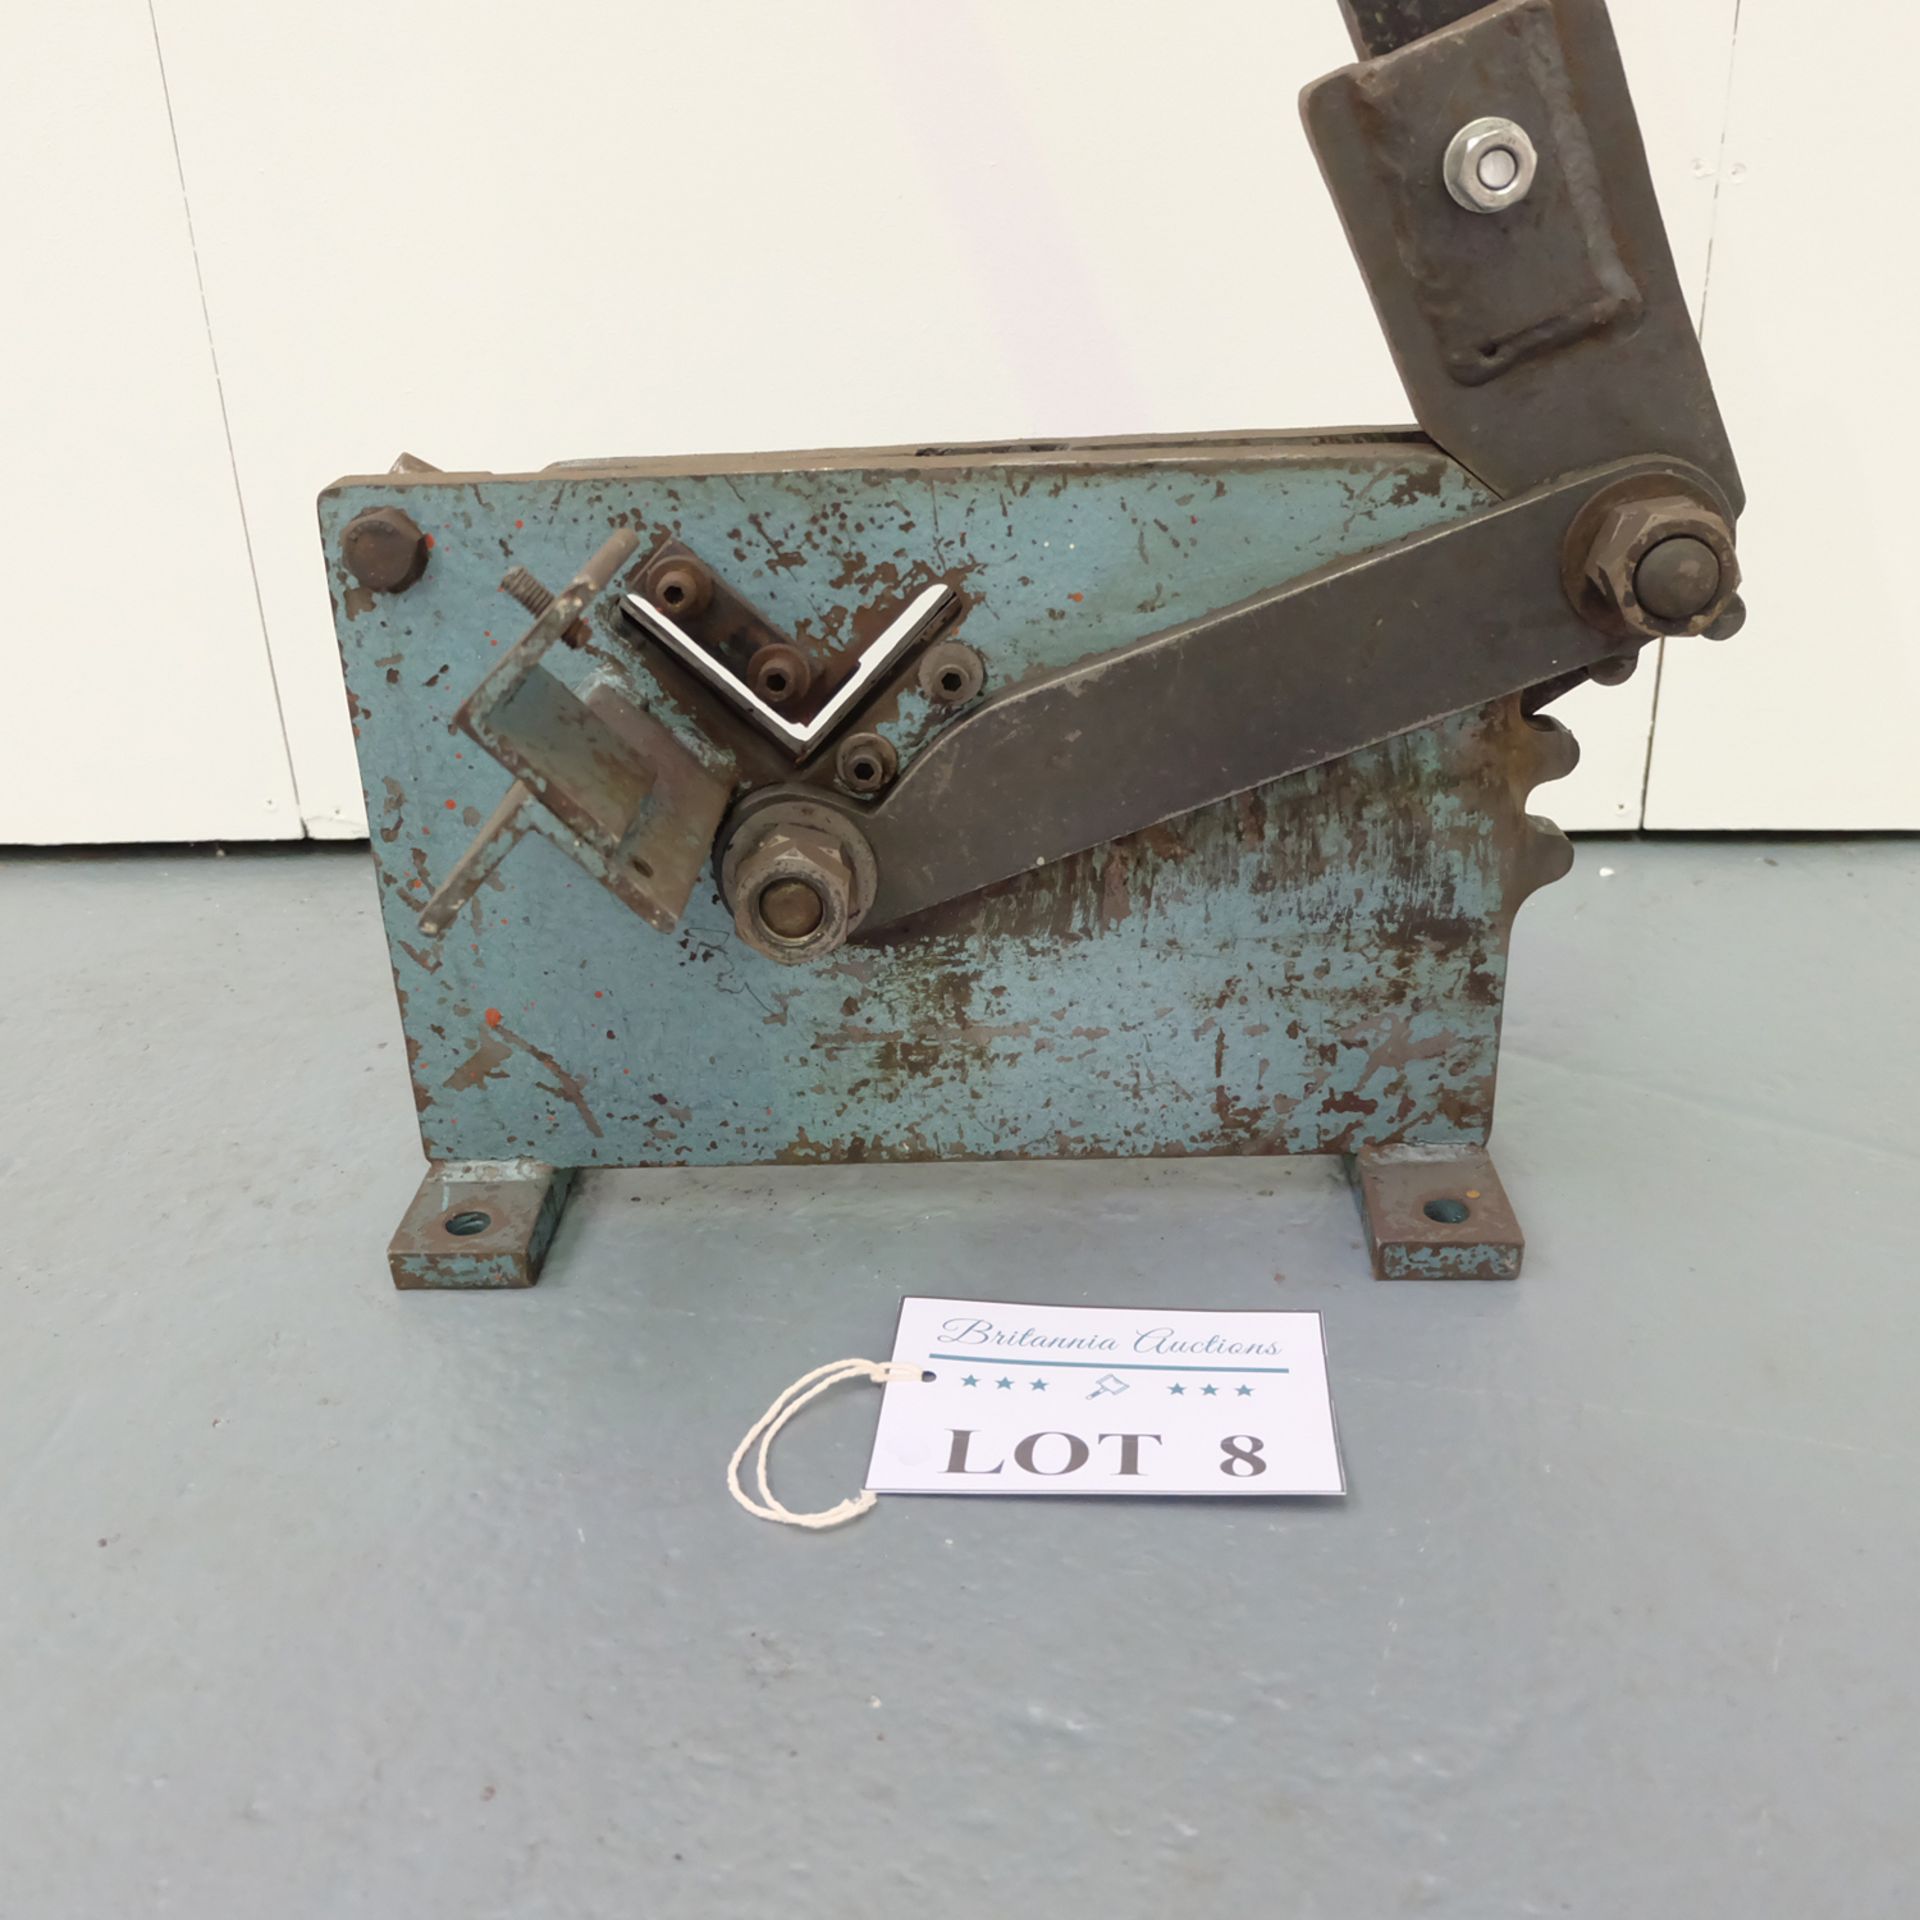 Manual Angle Iron Hand Cropper. - Image 2 of 4